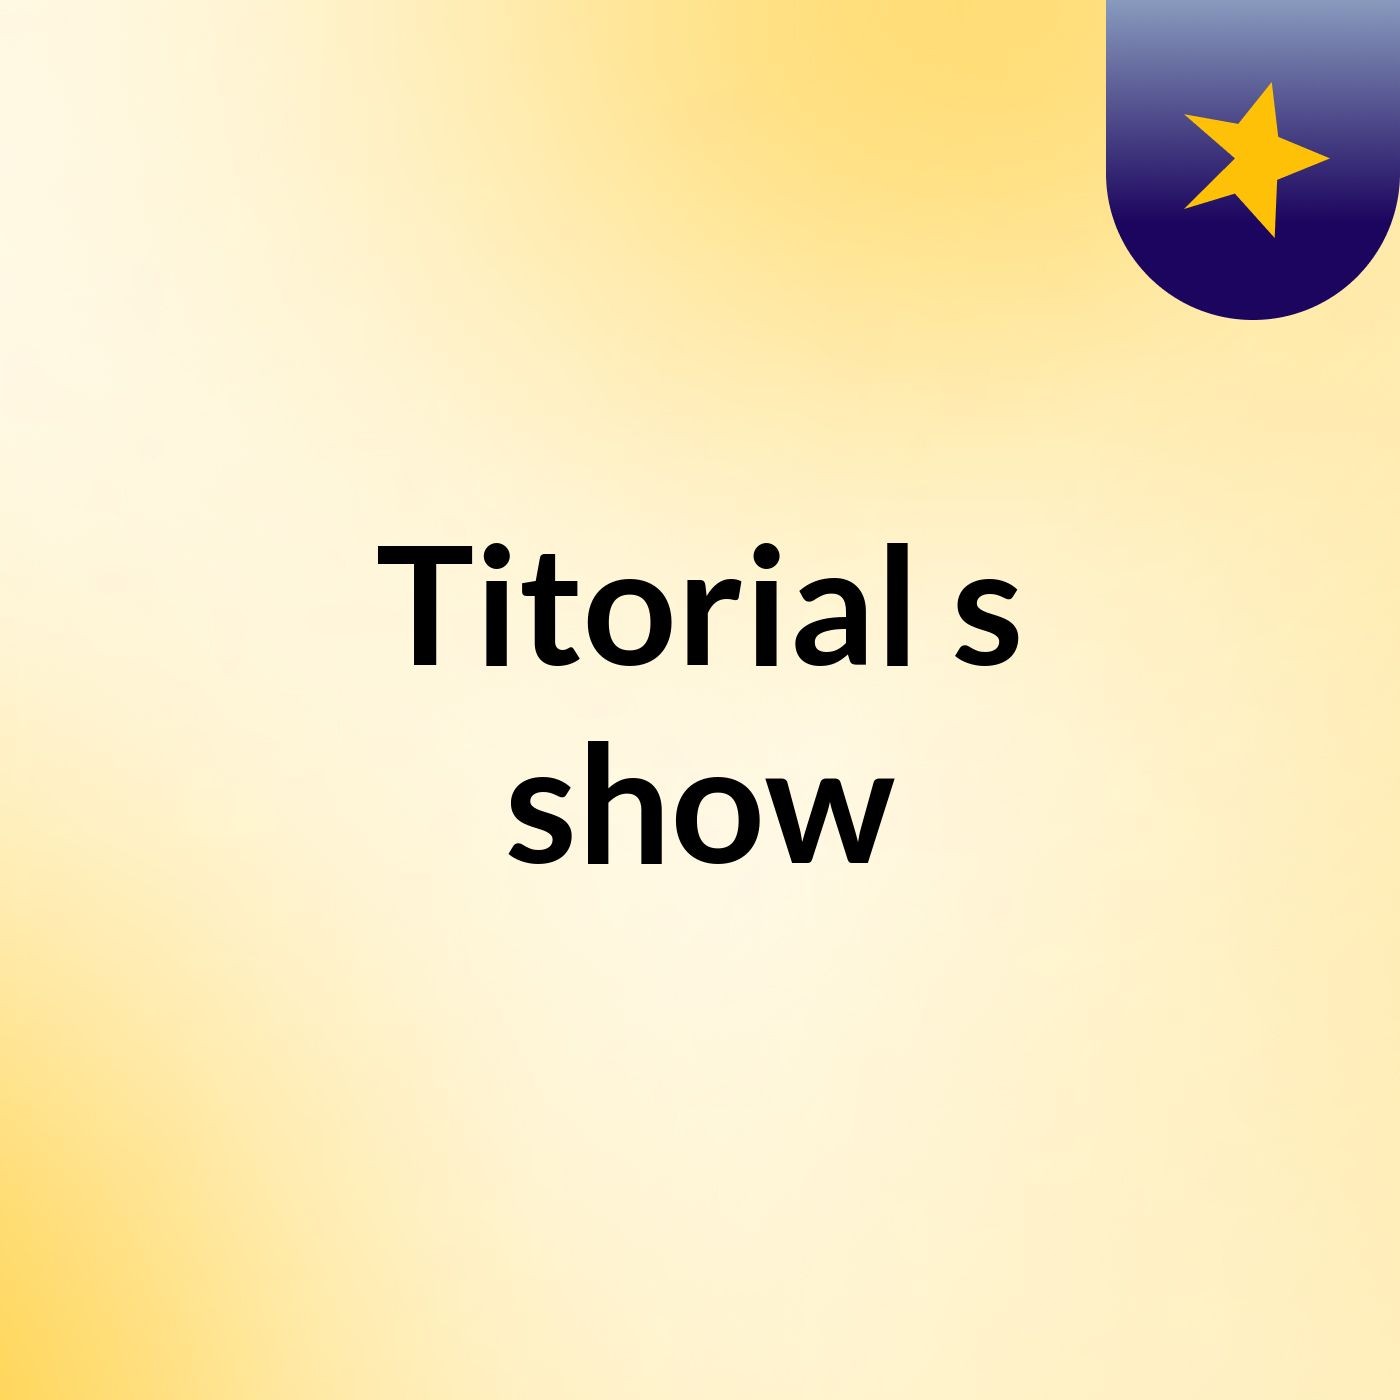 Titorial's show